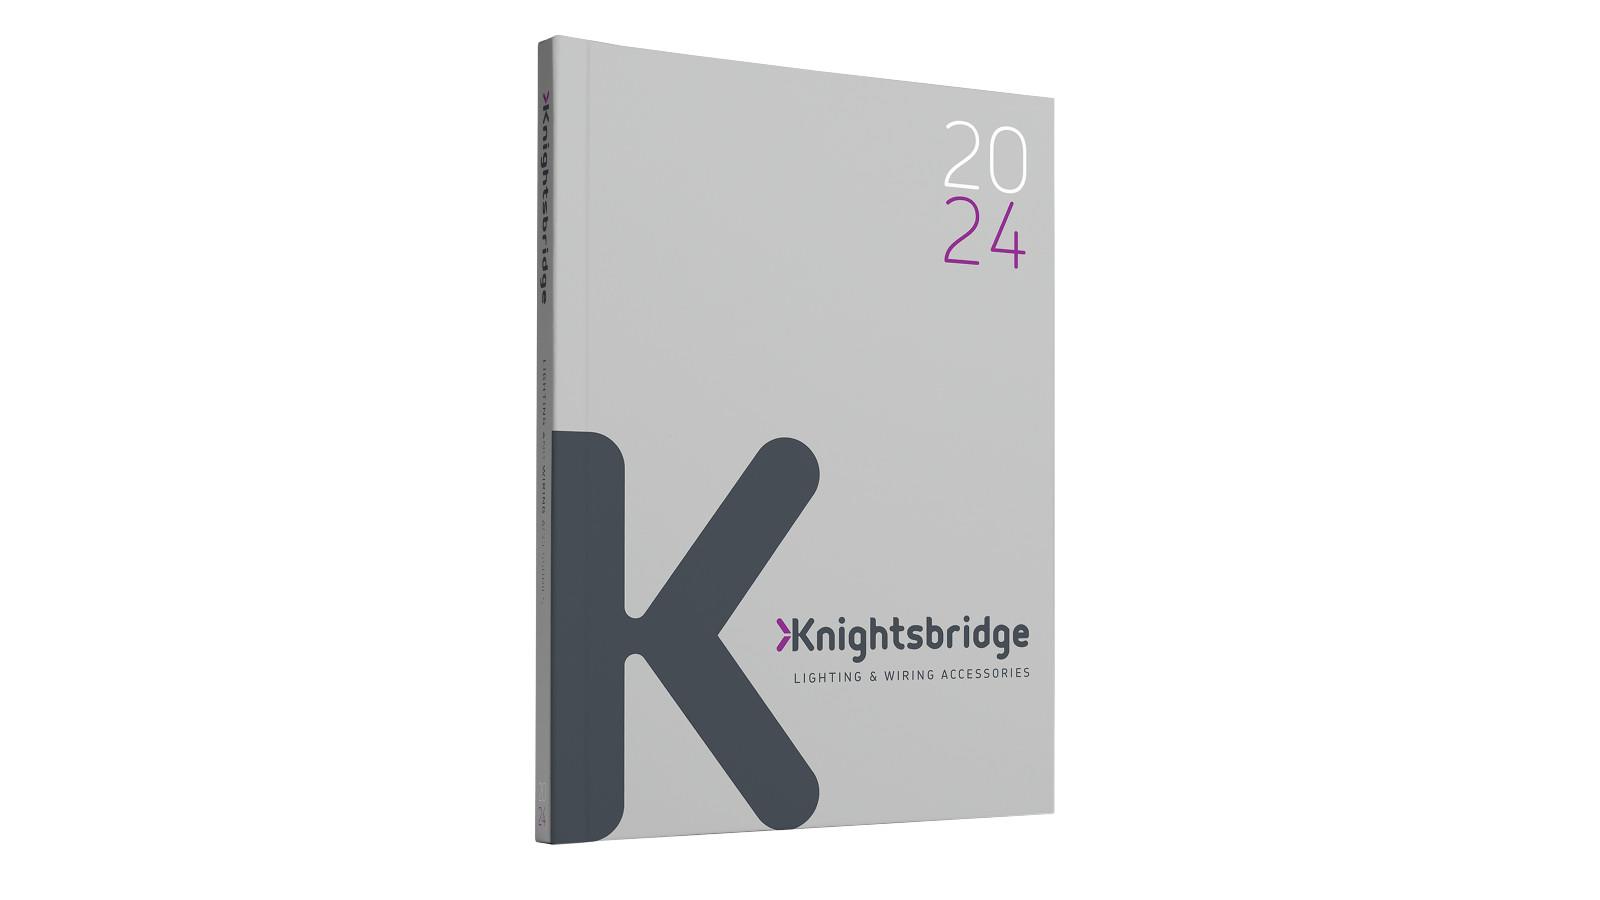 Knightsbridge’s bumper book reveals over 400 new products image